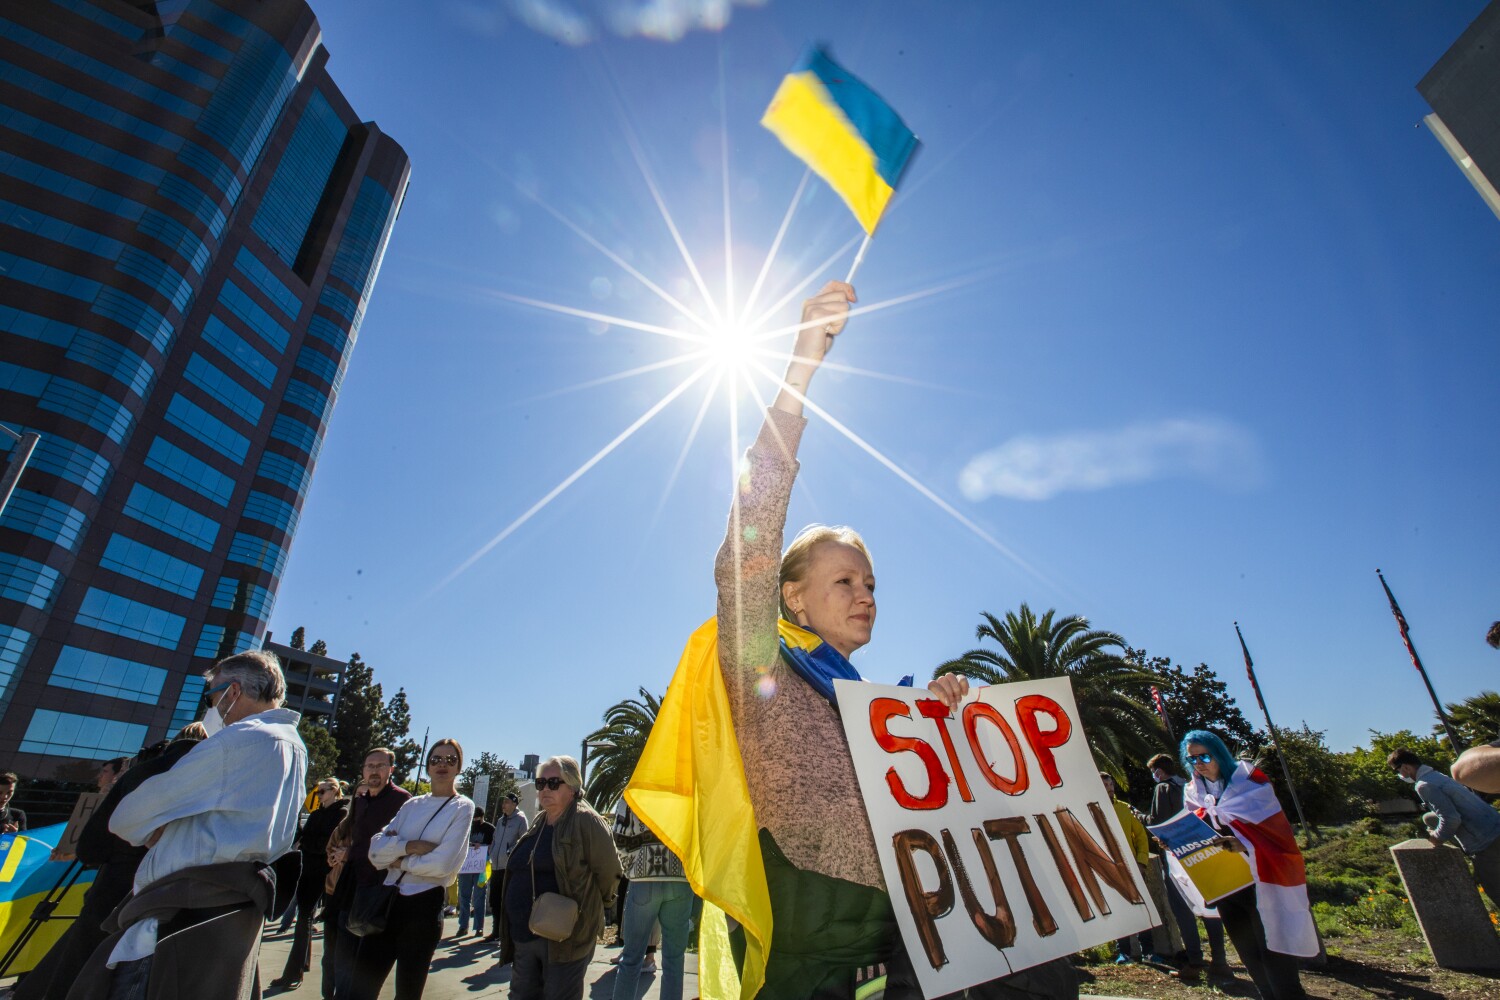 'A lot of innocent people will die': Ukrainians in California decry Russia's attack